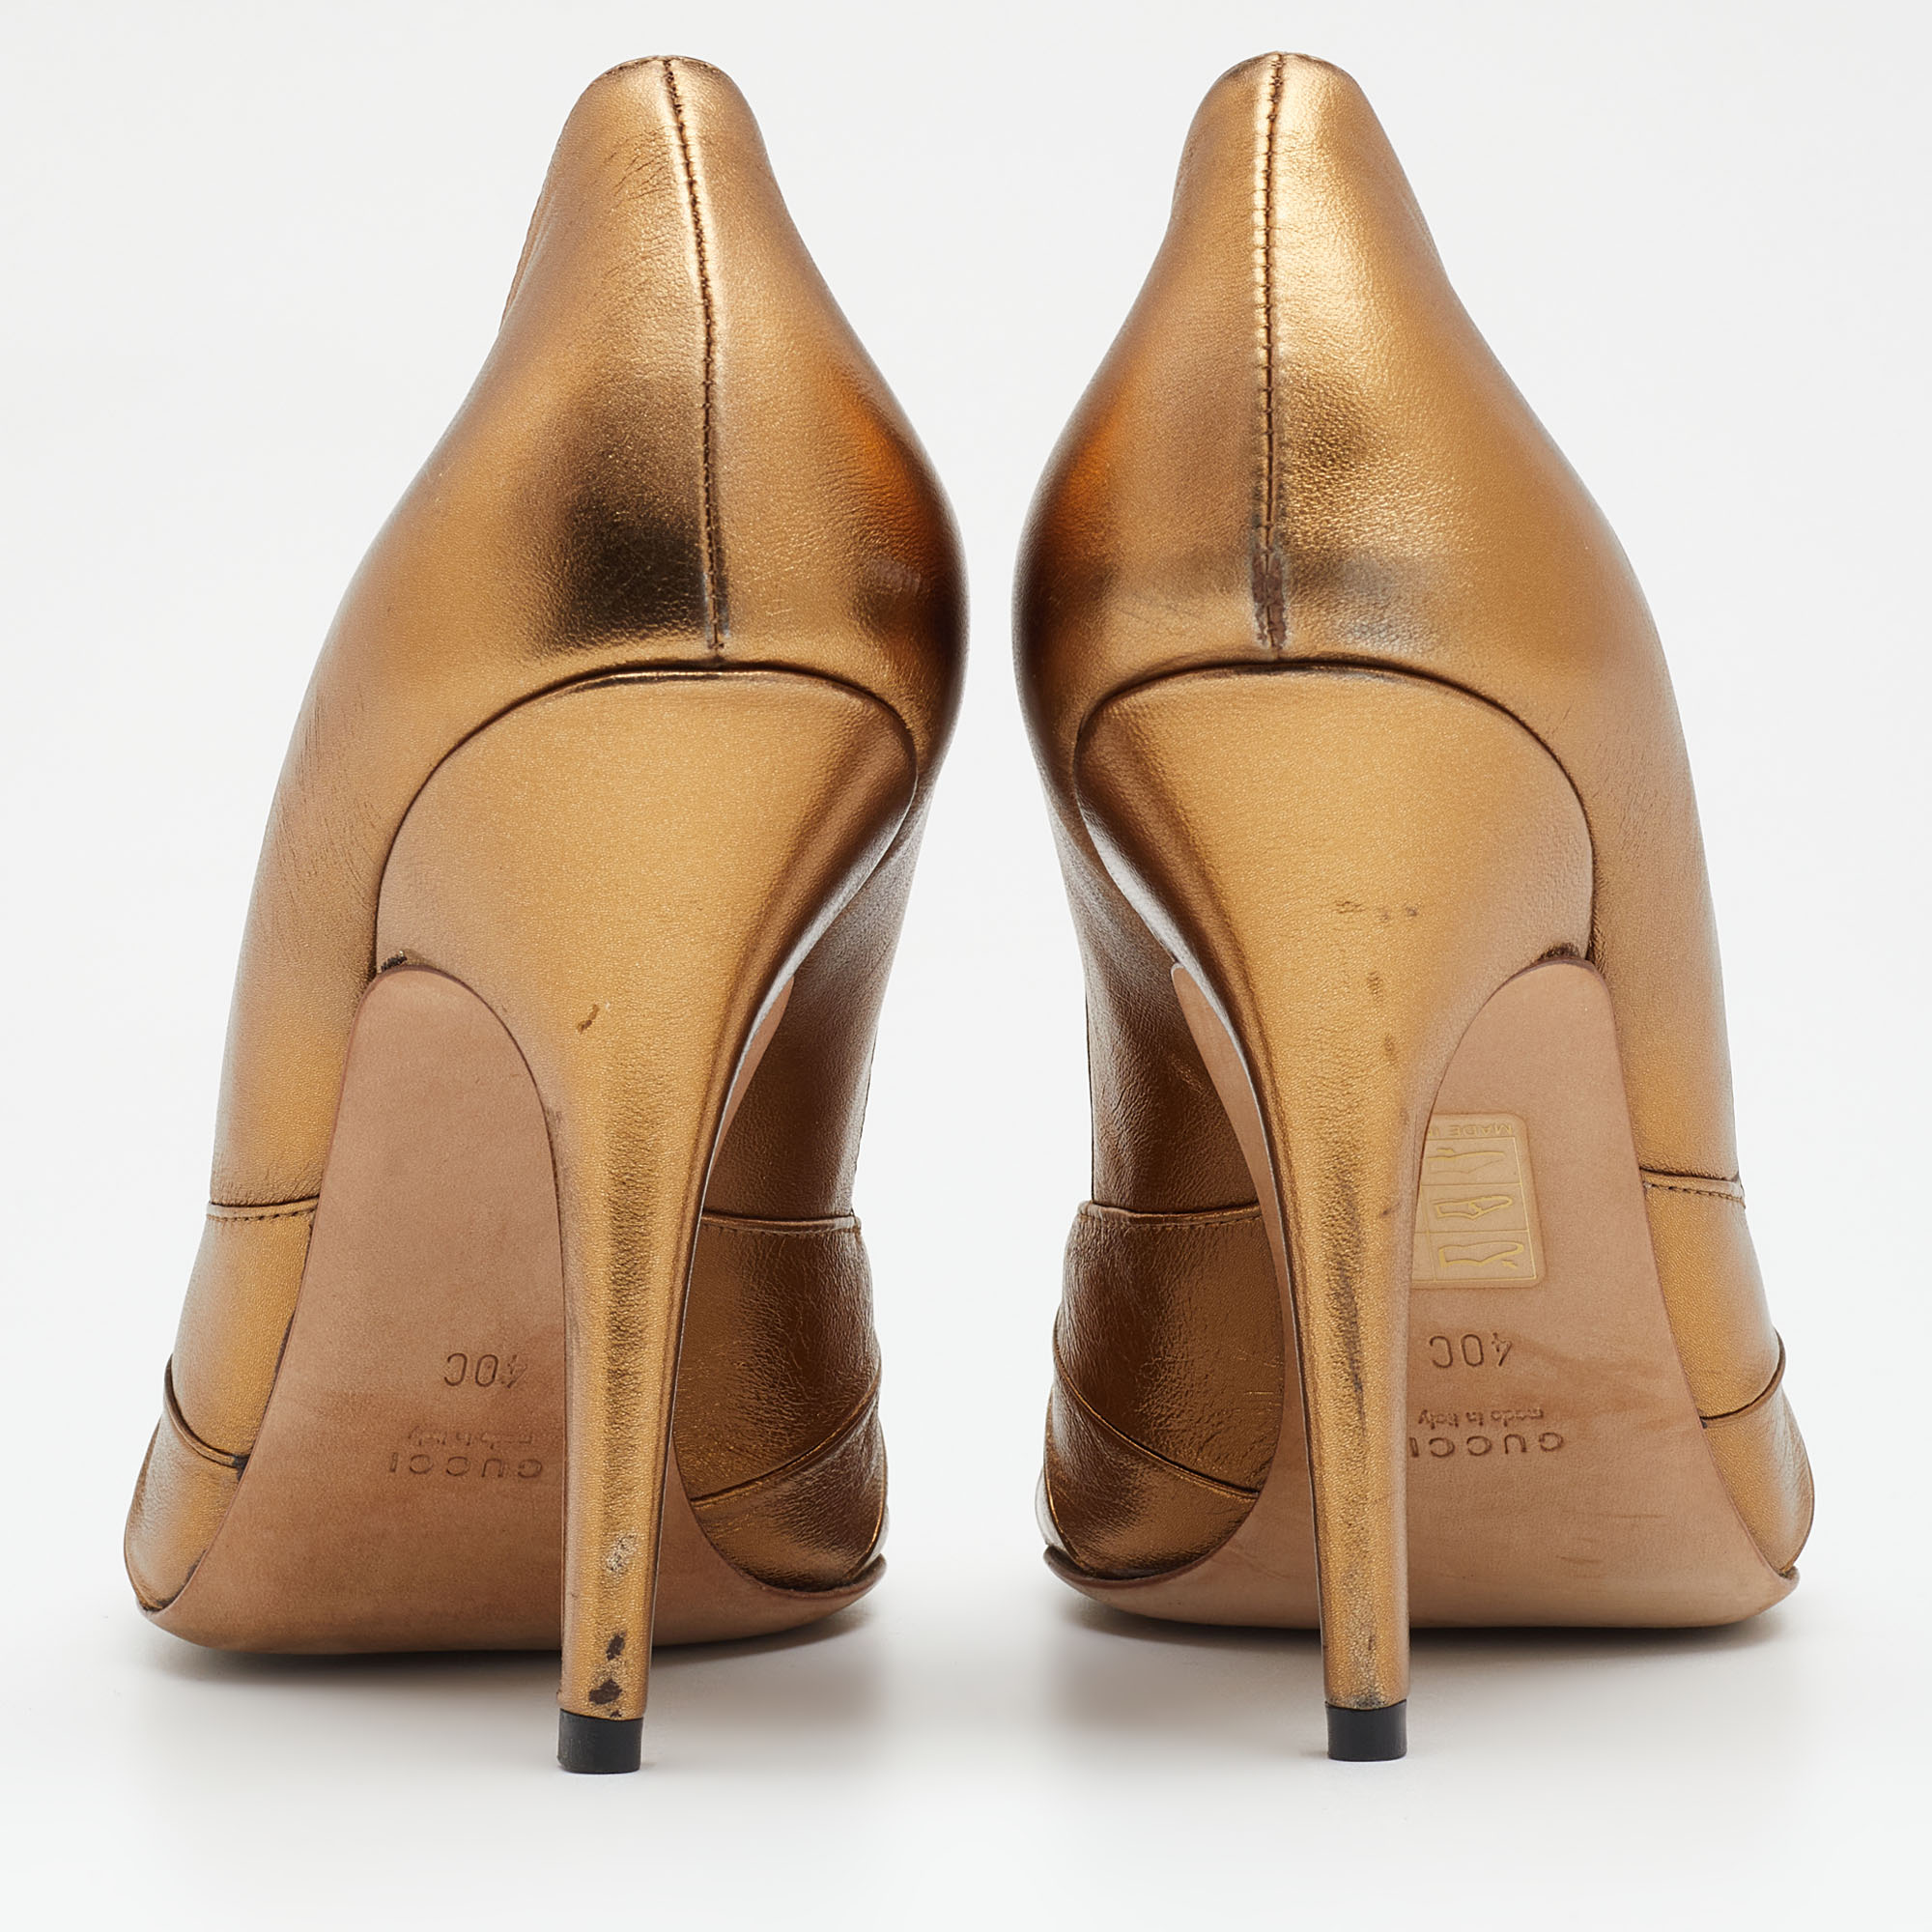 Gucci Metallic Gold Leather Knotted Peep Toe Pumps Size 40